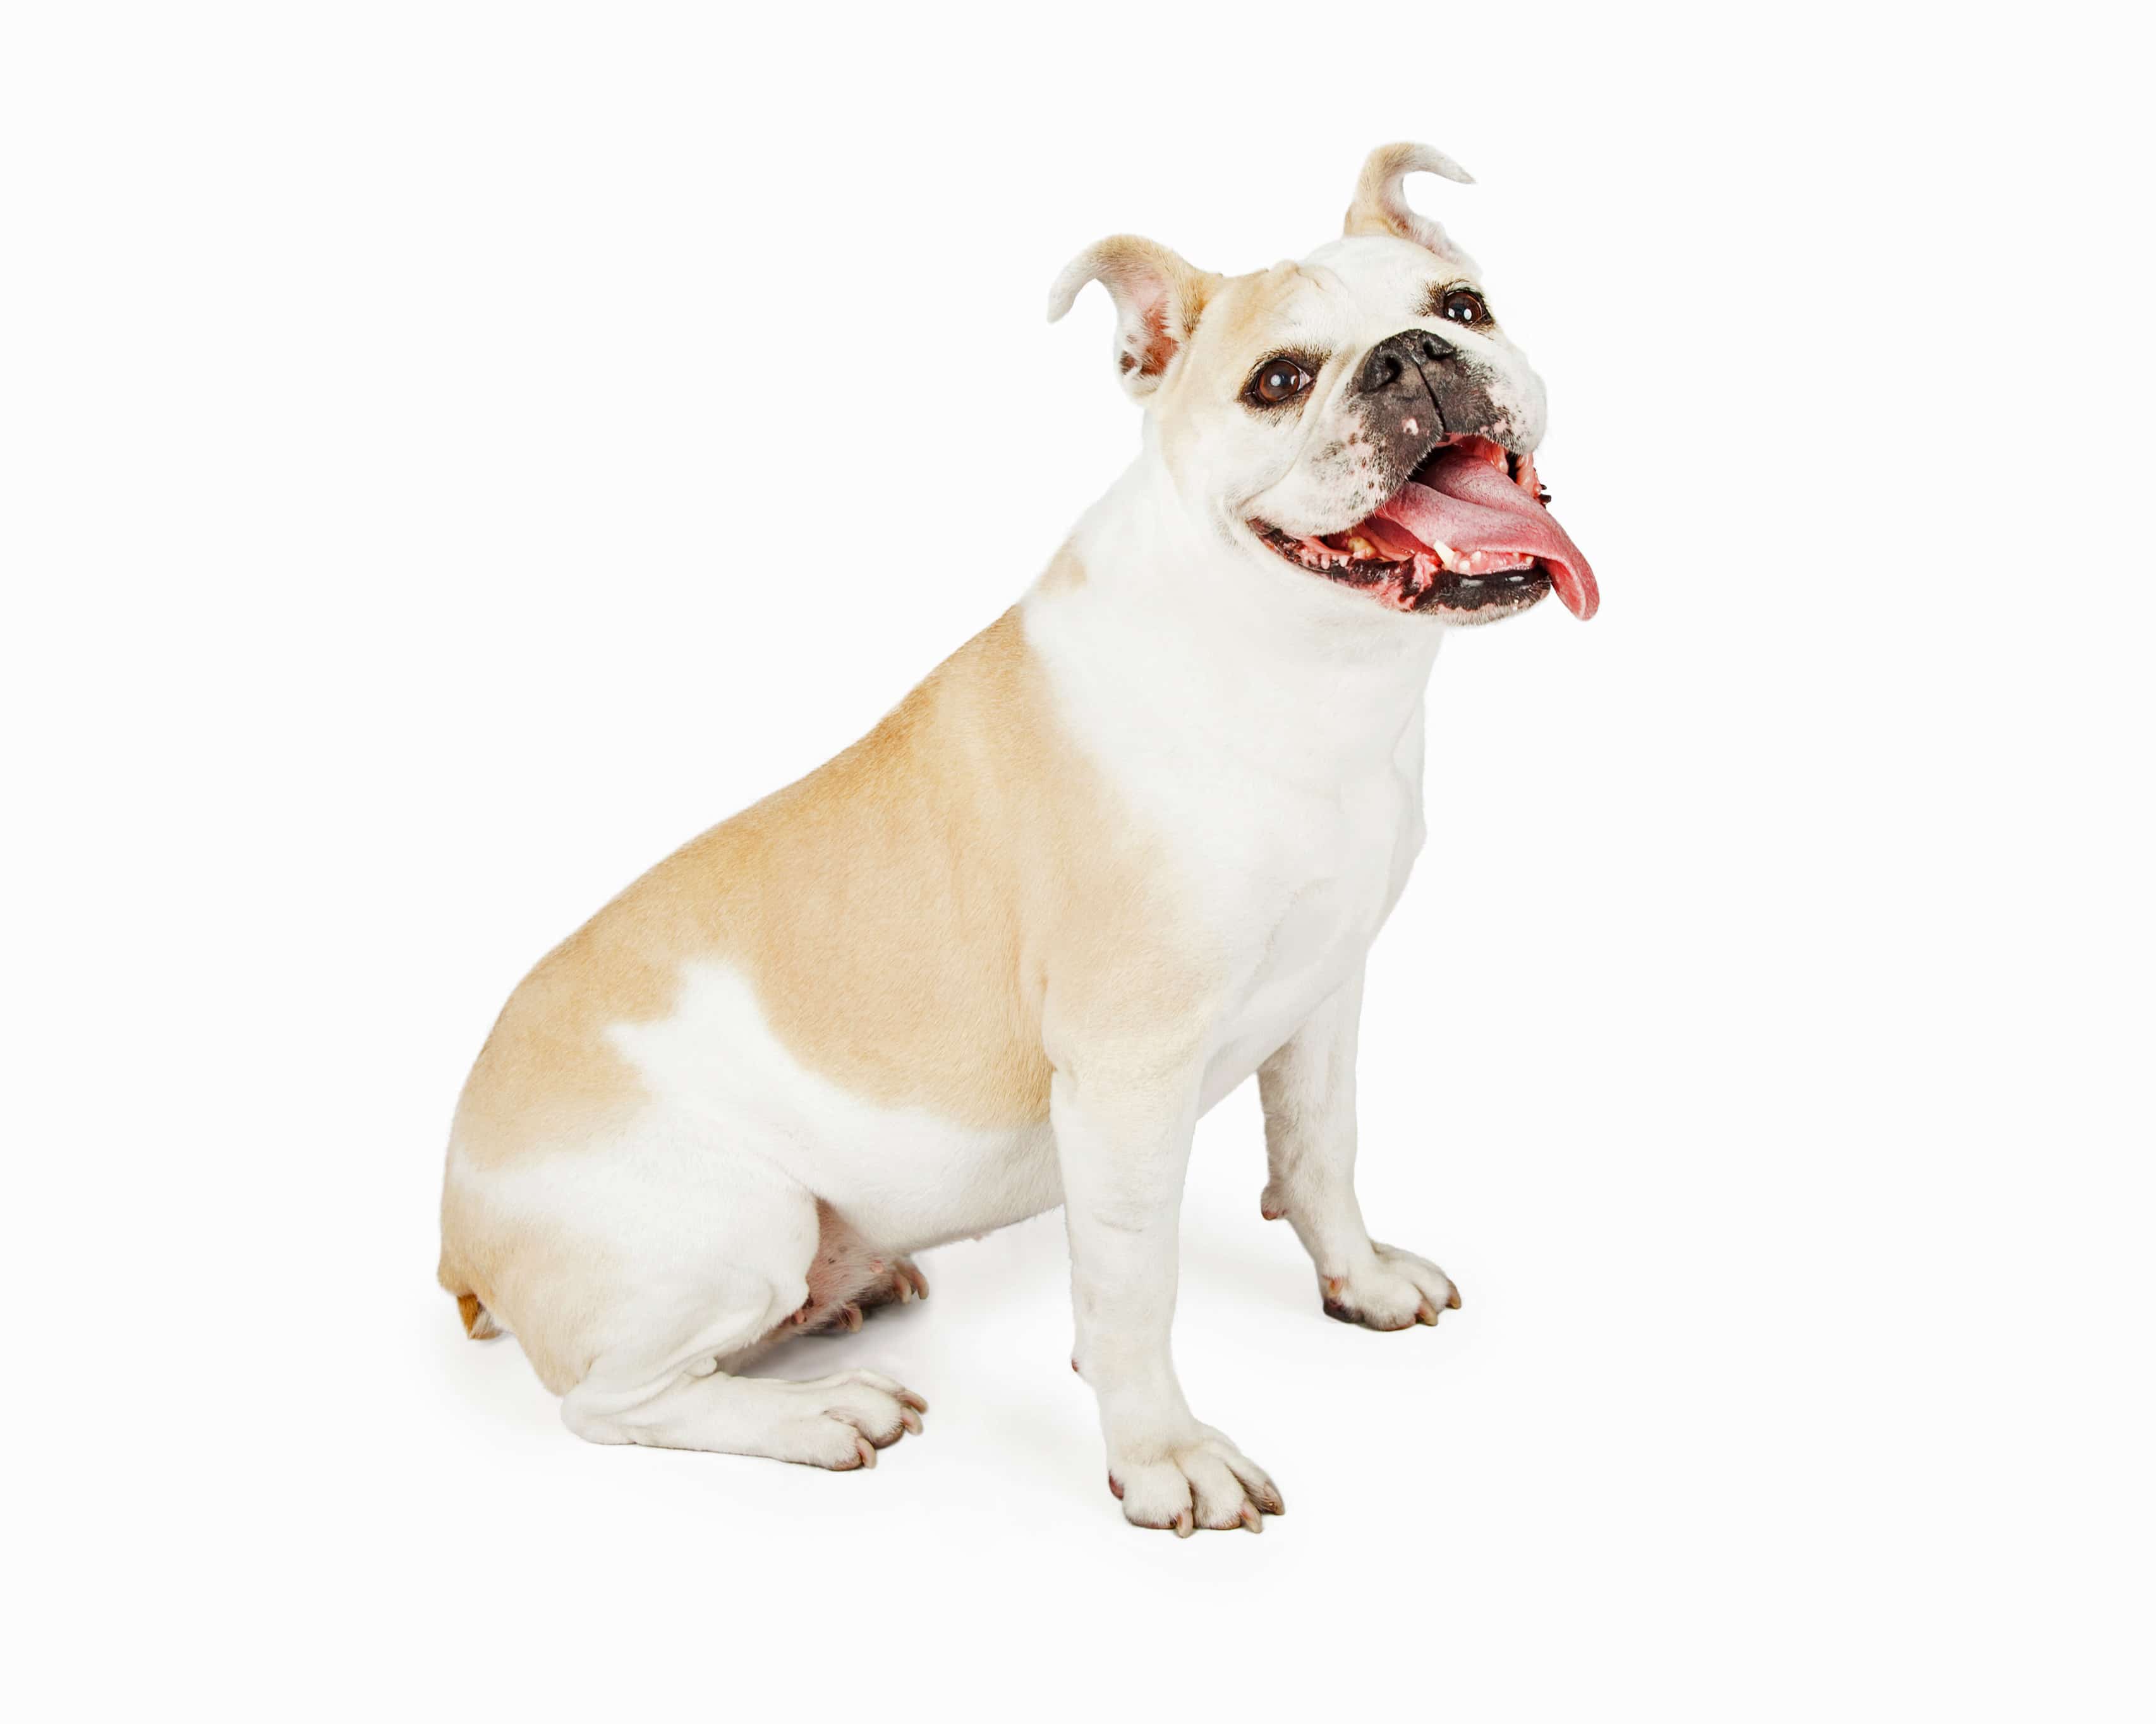 A happy and smiling Bulldog sitting at an angle with its tongue hanging out of its mouth.